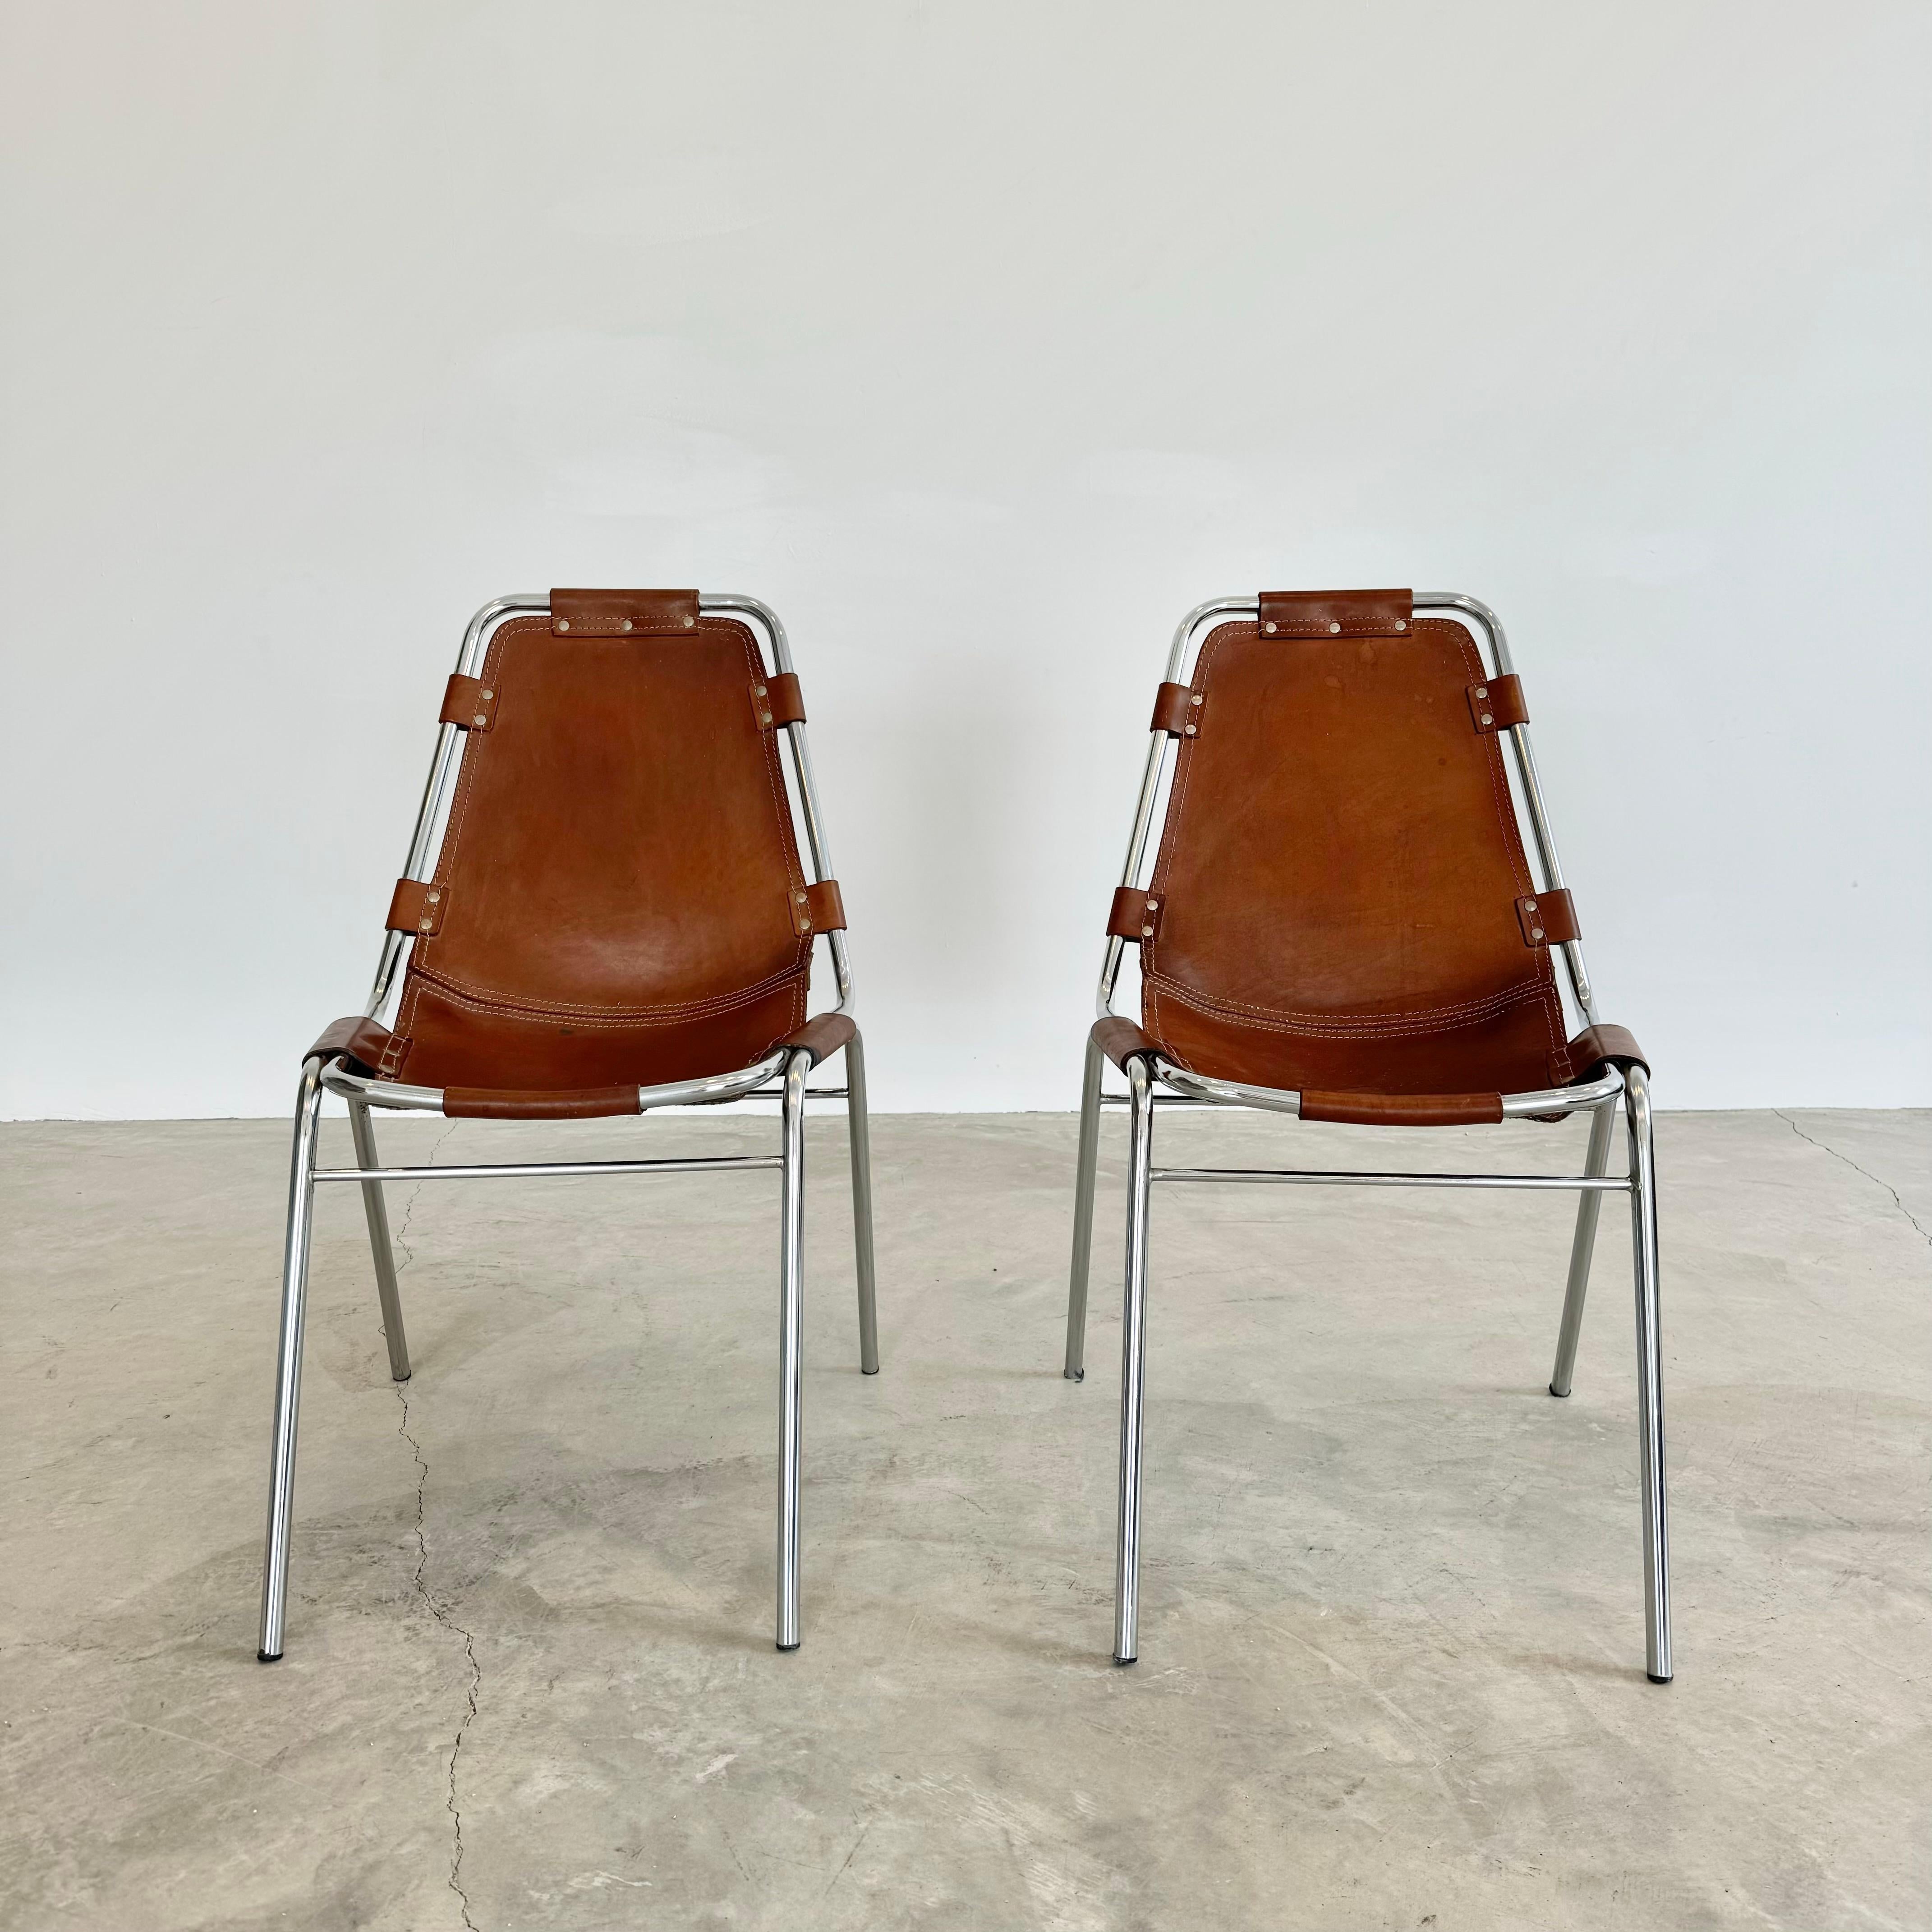 Les Arc Dining Chairs Selected by Charlotte Perriand, 1960s France For Sale 1